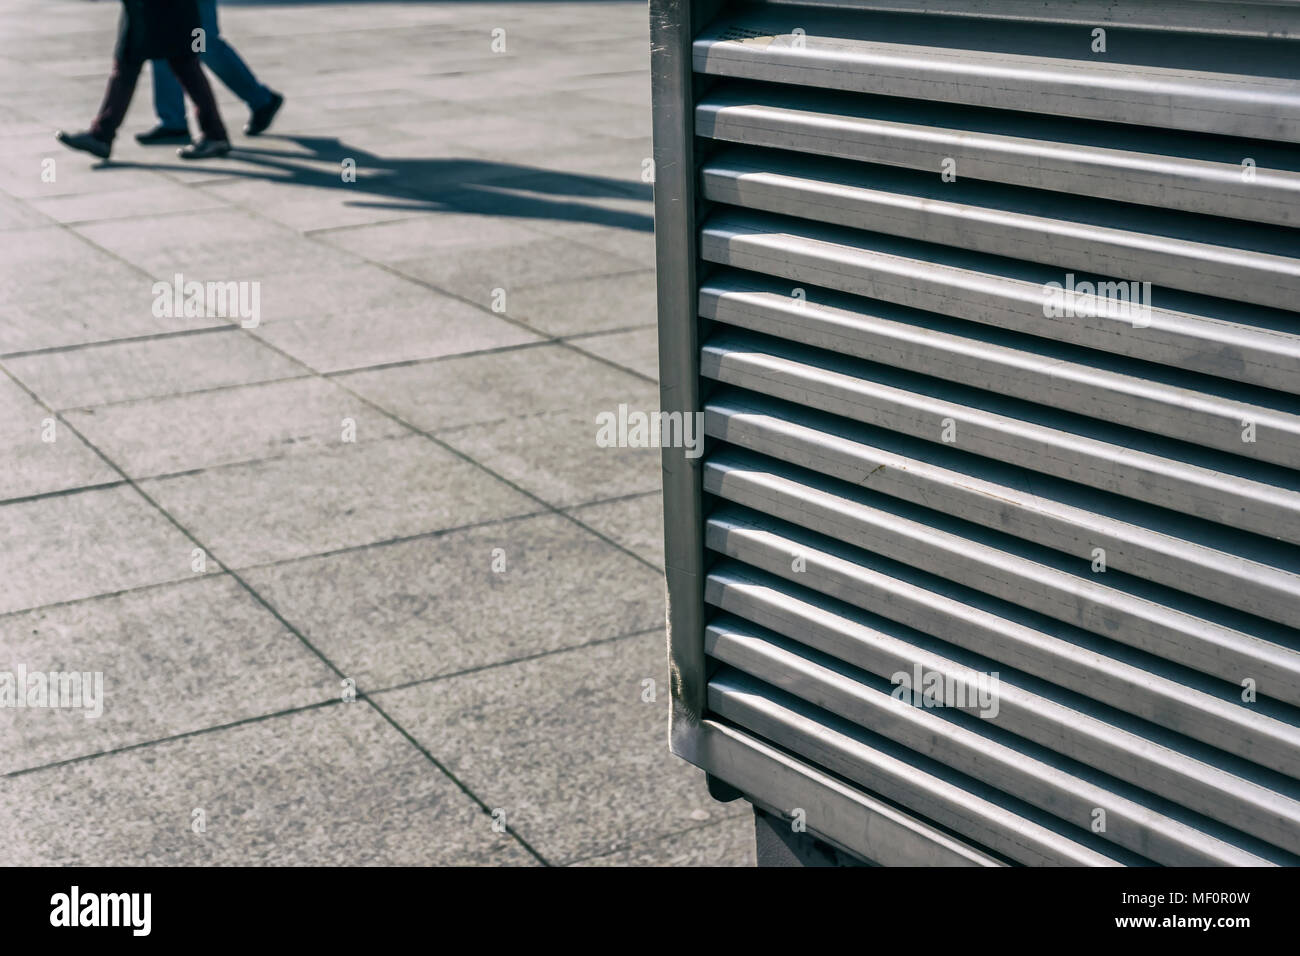 Close-up of subway ventilation system with passers-by in background Stock Photo